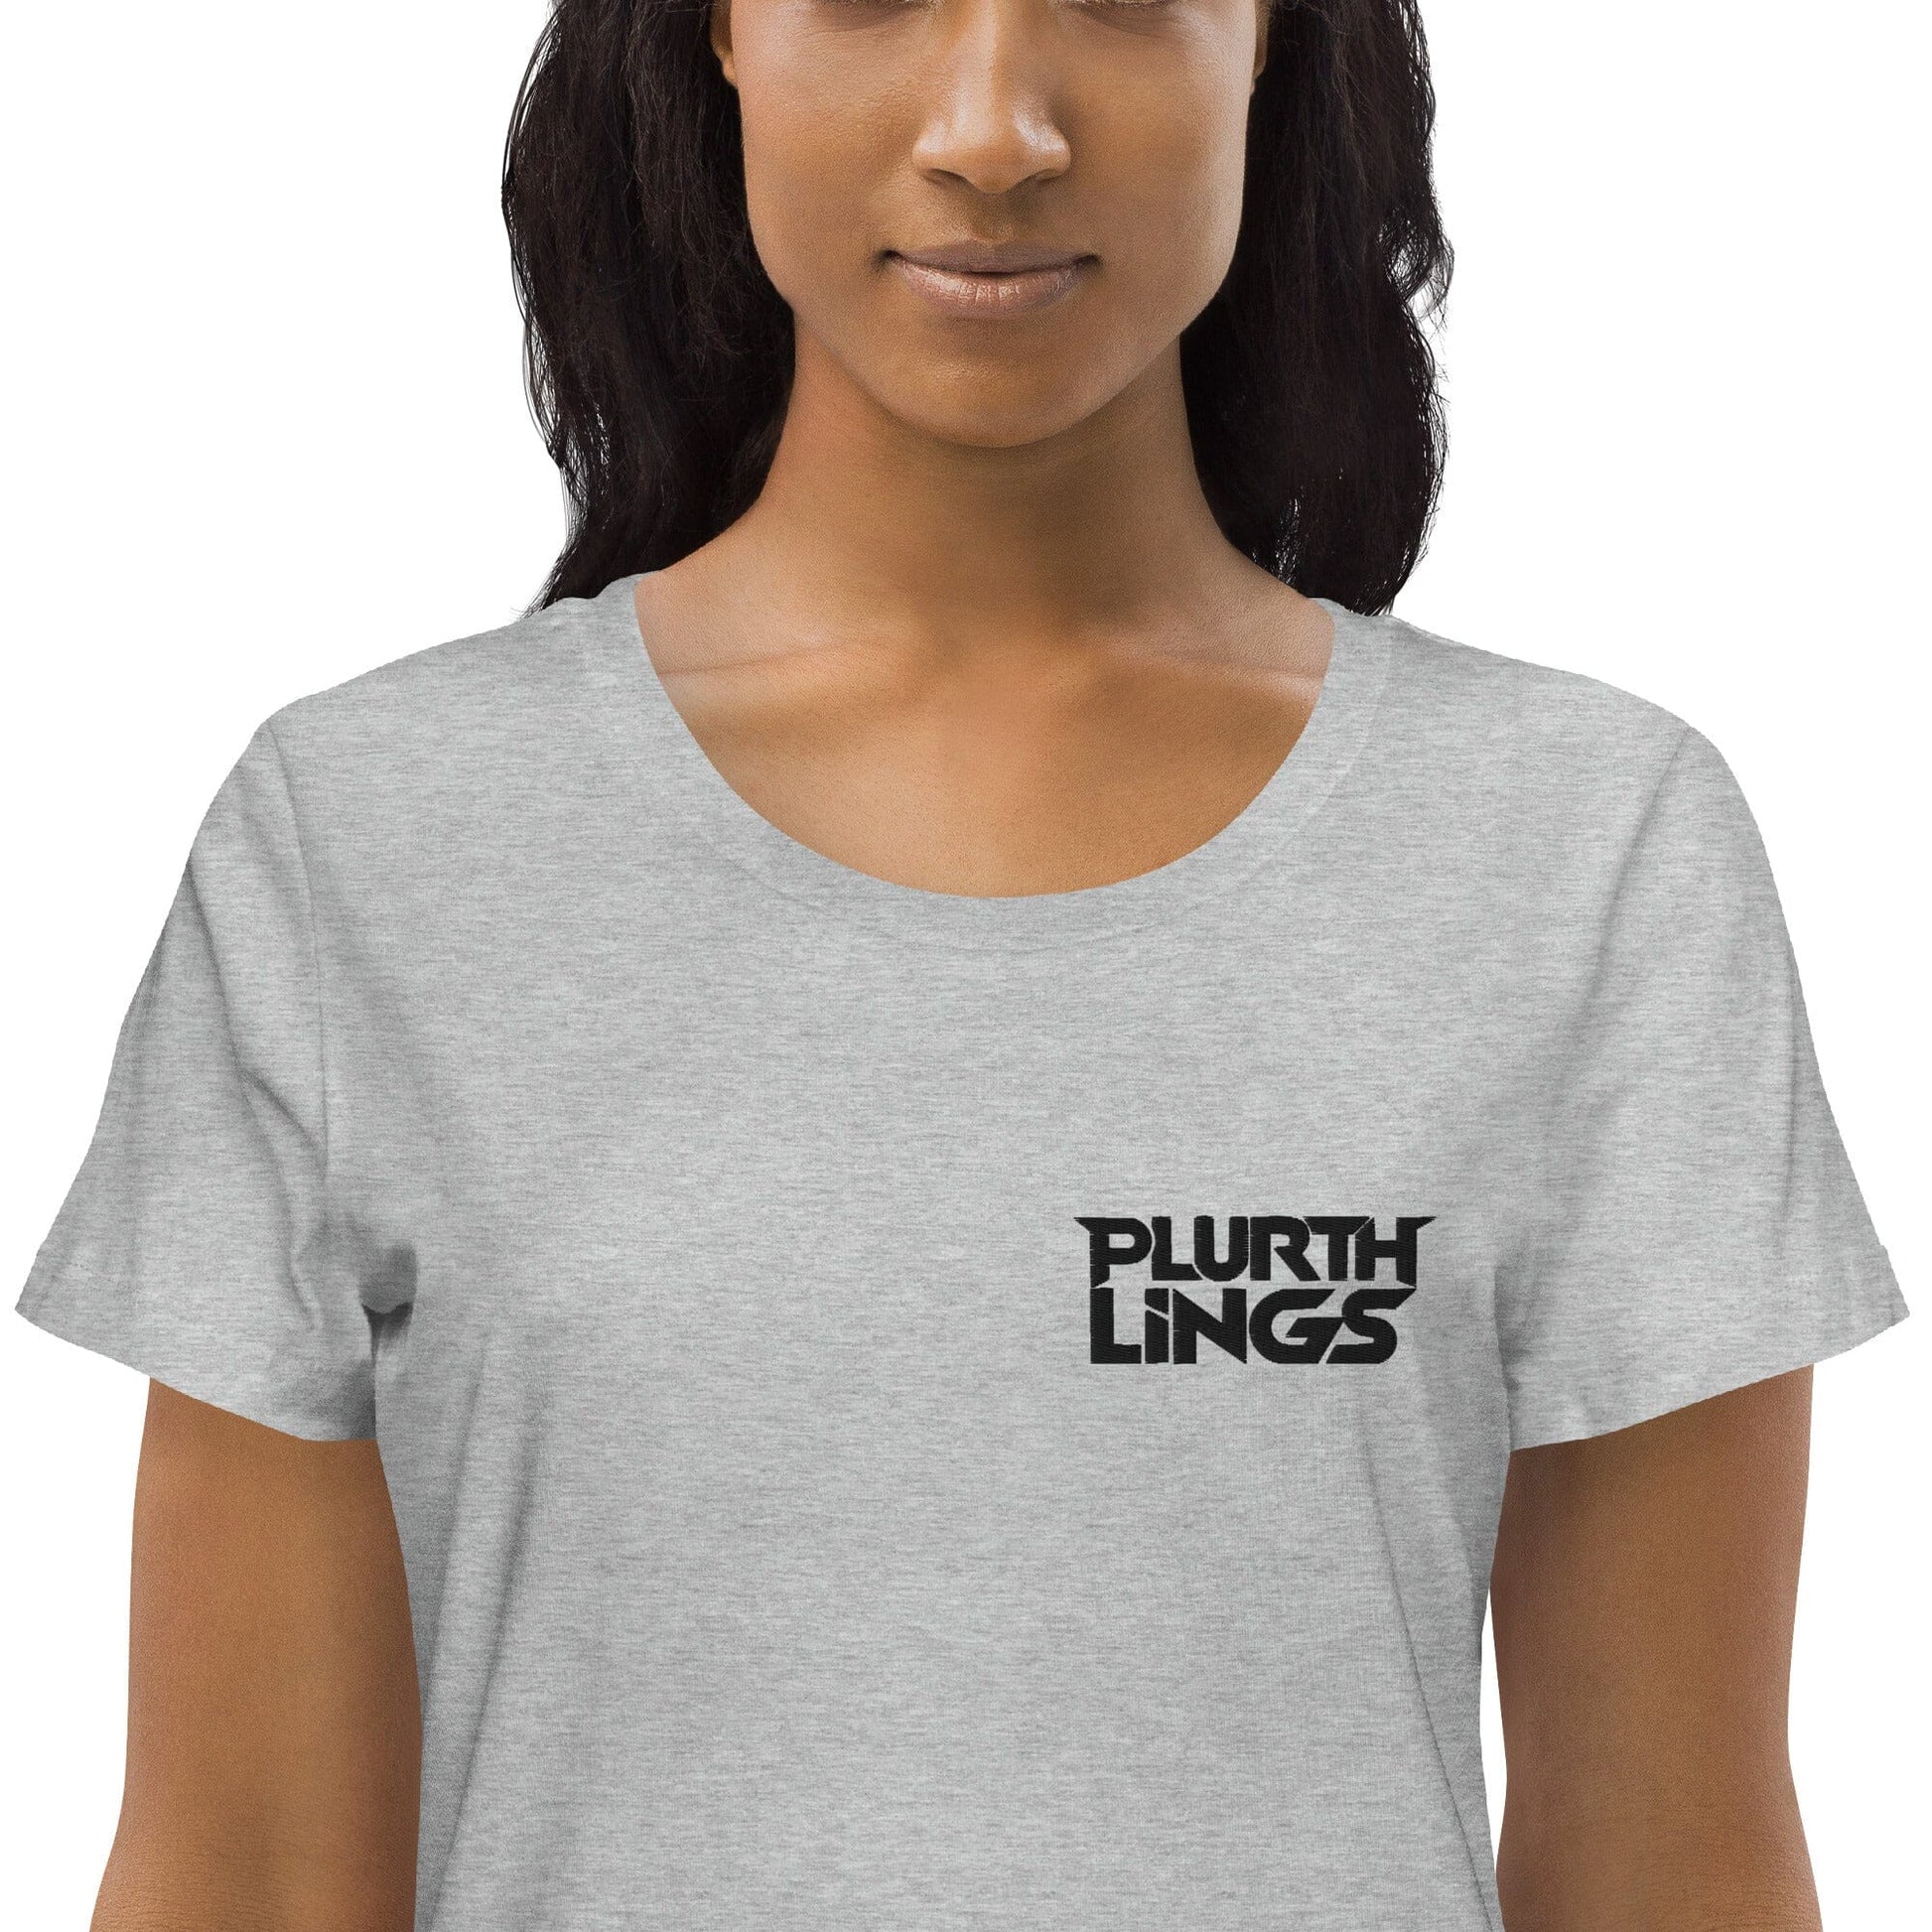 Plurthlings Embroidered Women's Fitted Eco Tee PLURTHLINGS 